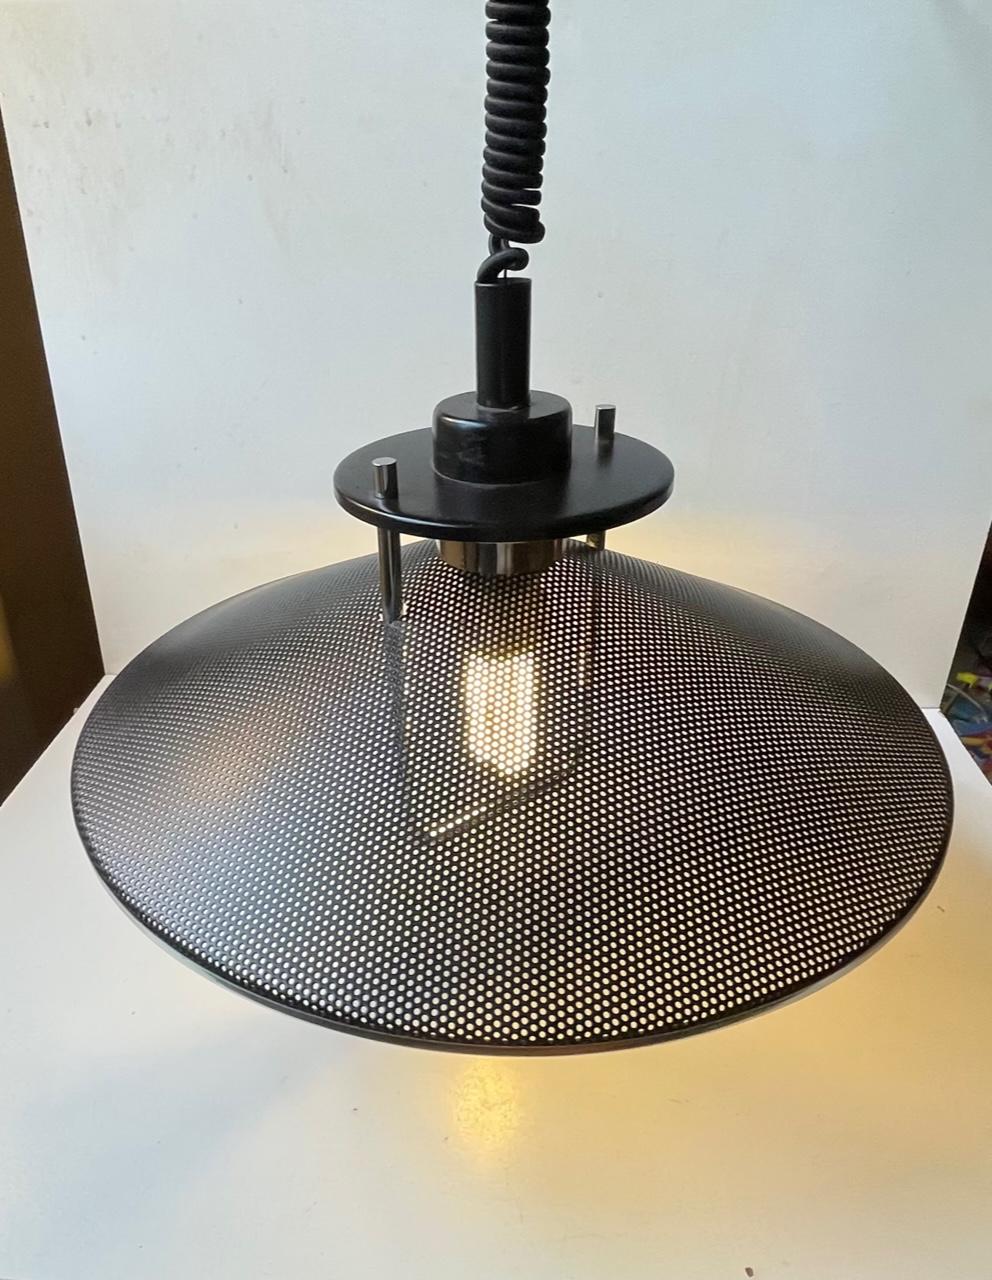 Powder-Coated Black Architects Studio Rise & Fall Ceiling Lamp by Bell Belysning, Danish 1980s For Sale